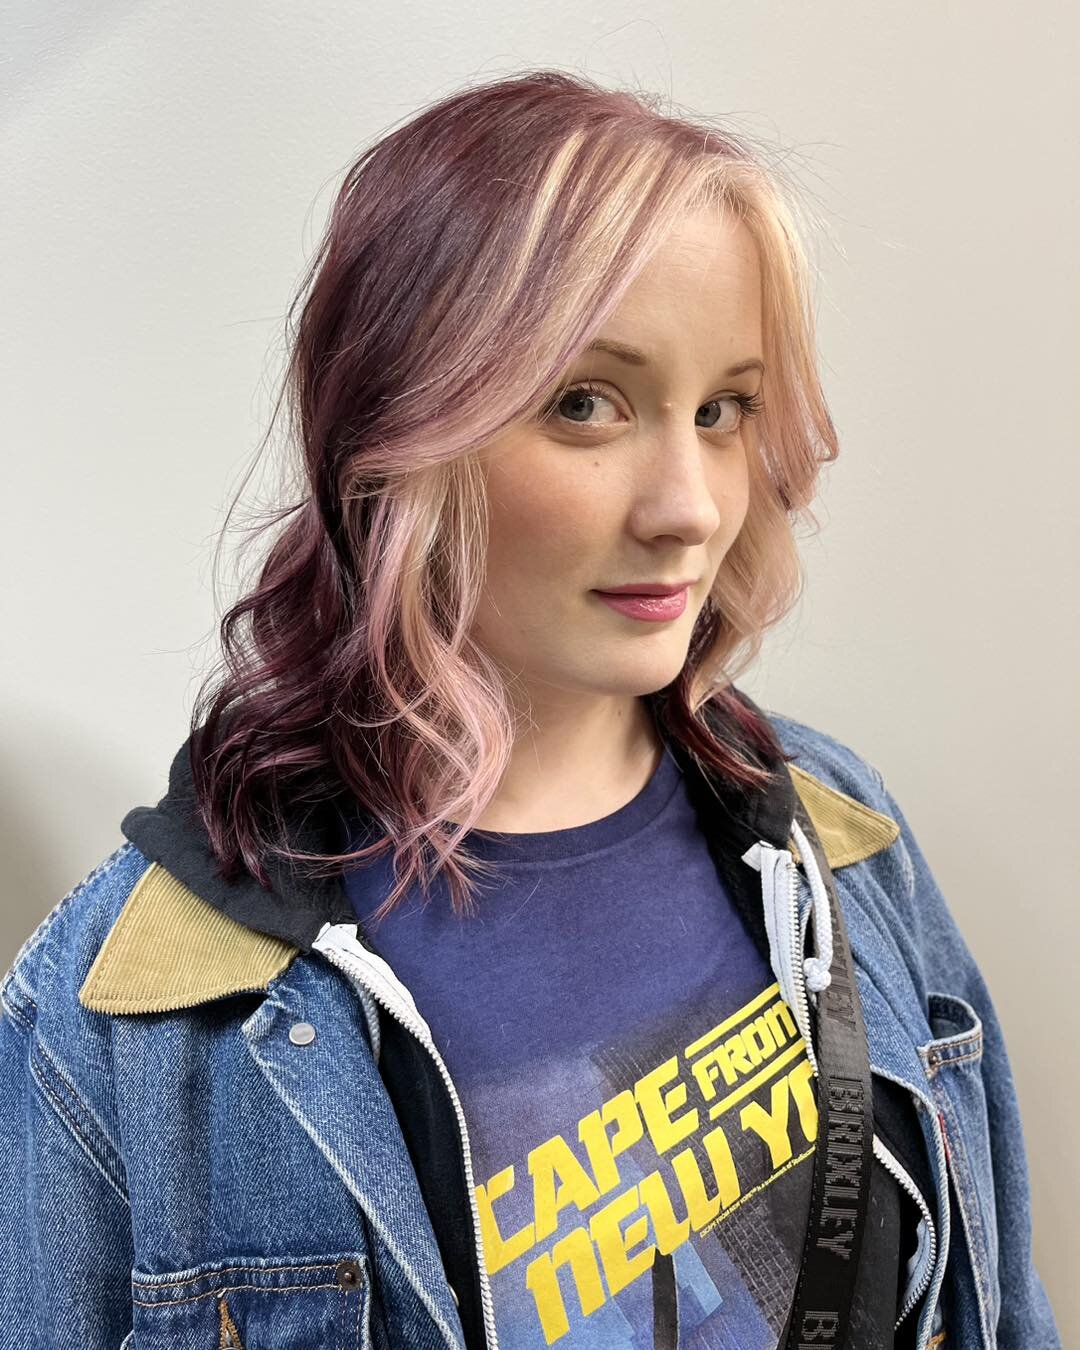 Look at pop of color! 

Stylist: Hair by Shelly Bowman

#573stylist #hairstylist #como #hairstyle #columbiamissourihairsalon #clipjointcomo #comohairsalon #columbiamo #columbiamissouri #oligopro